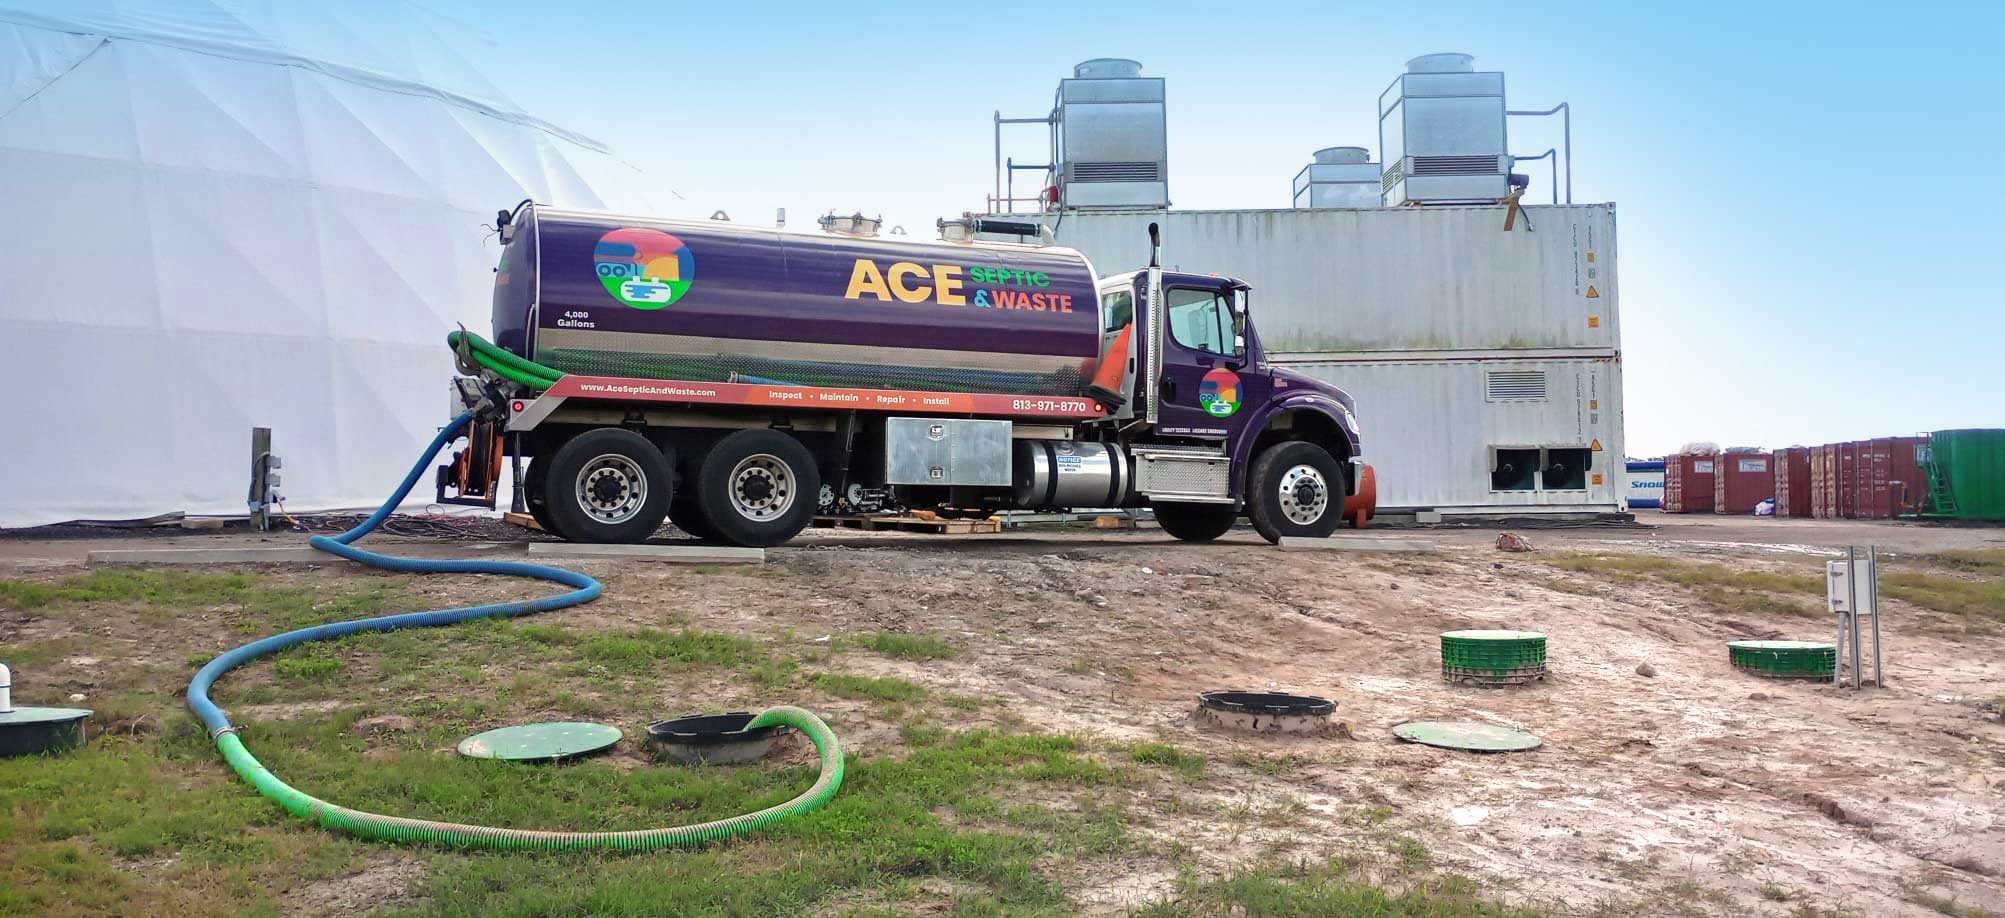 Septic truck pumping out wastewater from an underground septic tank at a business complex.